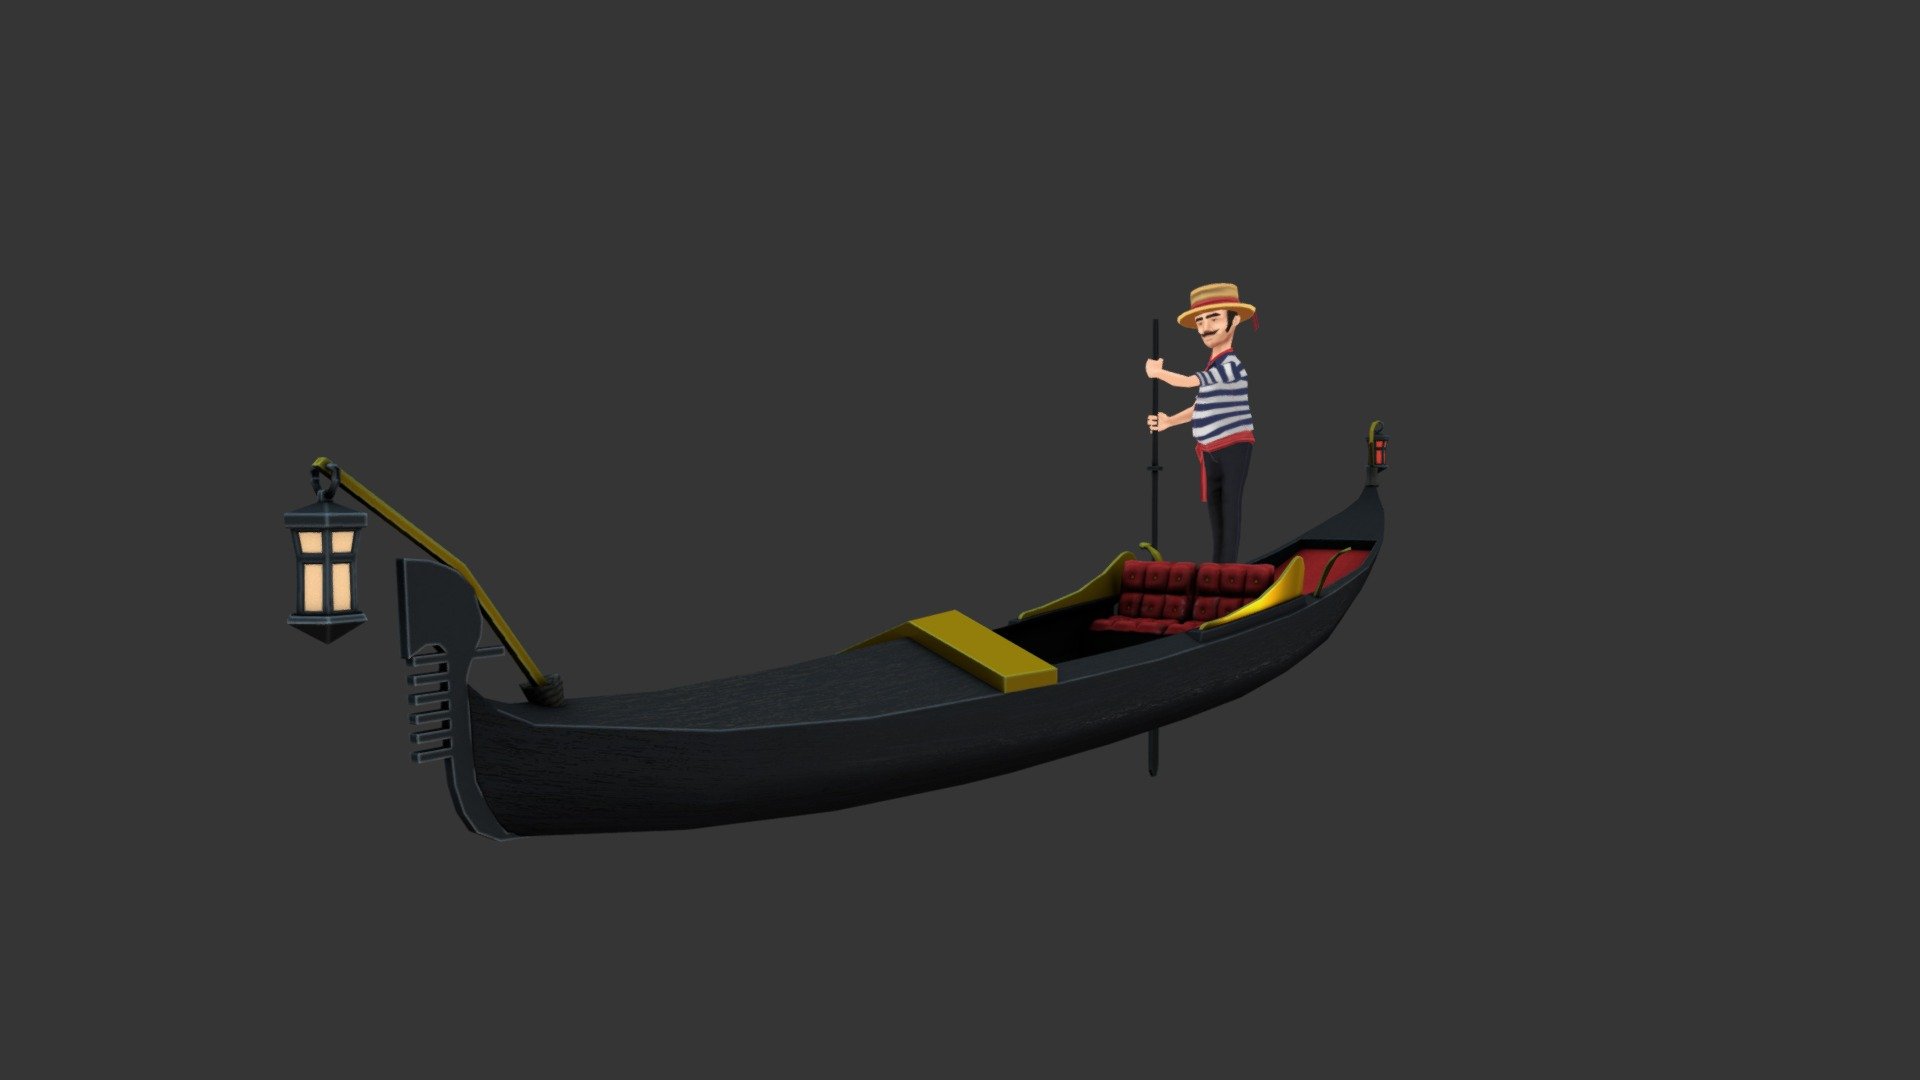 3D model in fbx format

2048 texture 

rigged with mixamo and corrected by hand,

compatible with mixamo animation

compatible with Unity generic/ humanoid rig

Comes with blend file with RIG - Character Italian Venetian Gondolier Lowpoly - Buy Royalty Free 3D model by mahrcheen 3d model